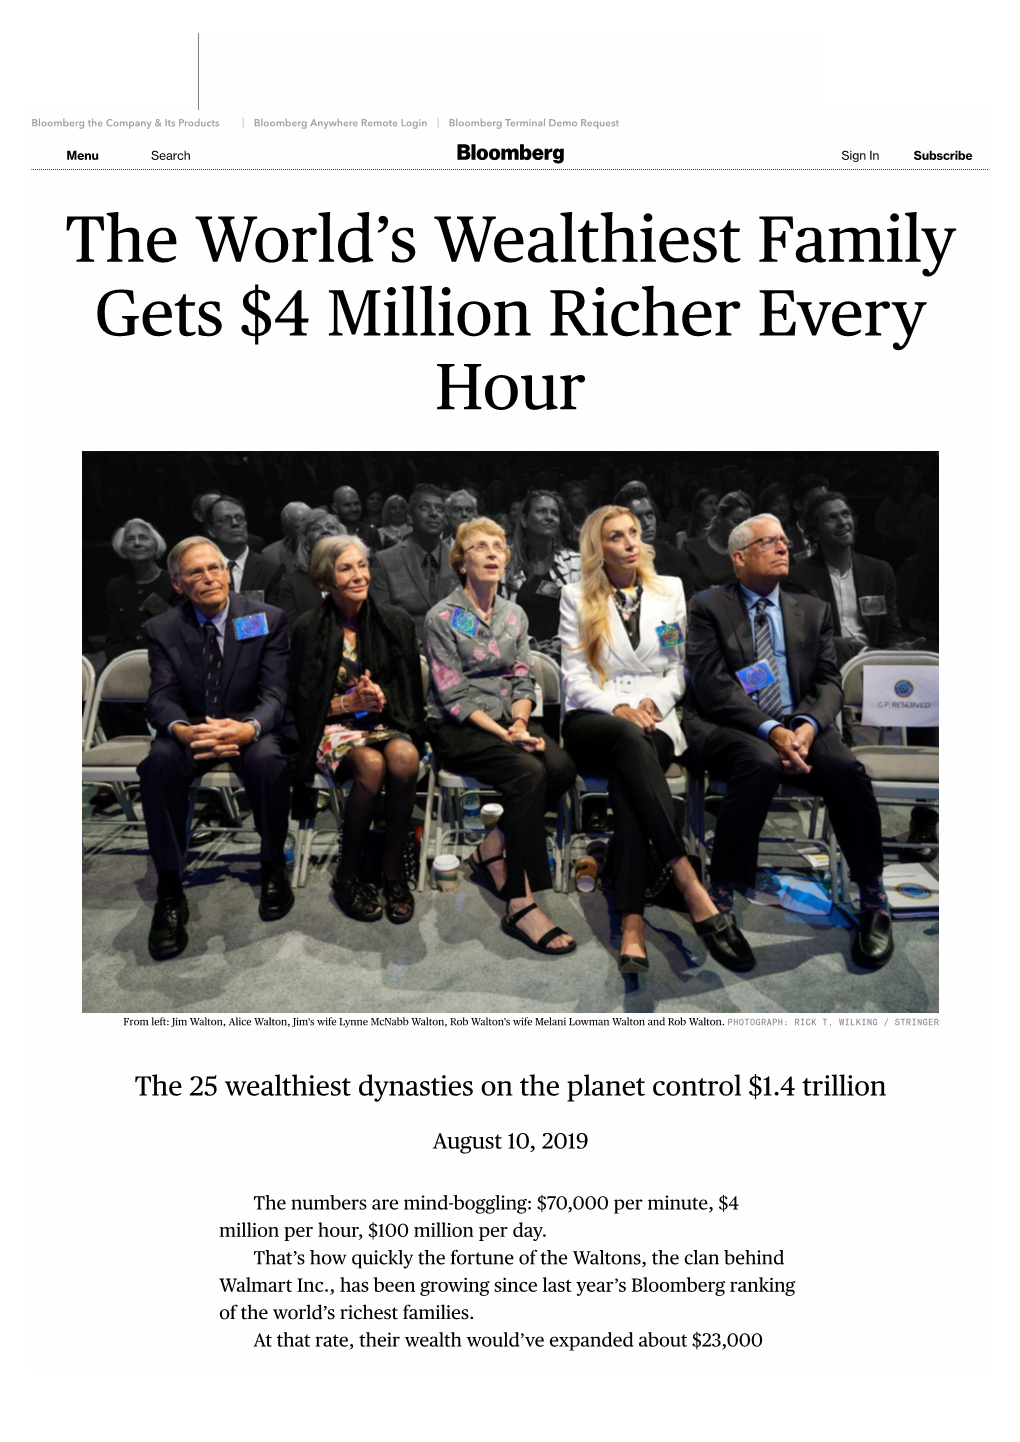 The World's Wealthiest Family Makes $4 Million Every Hour